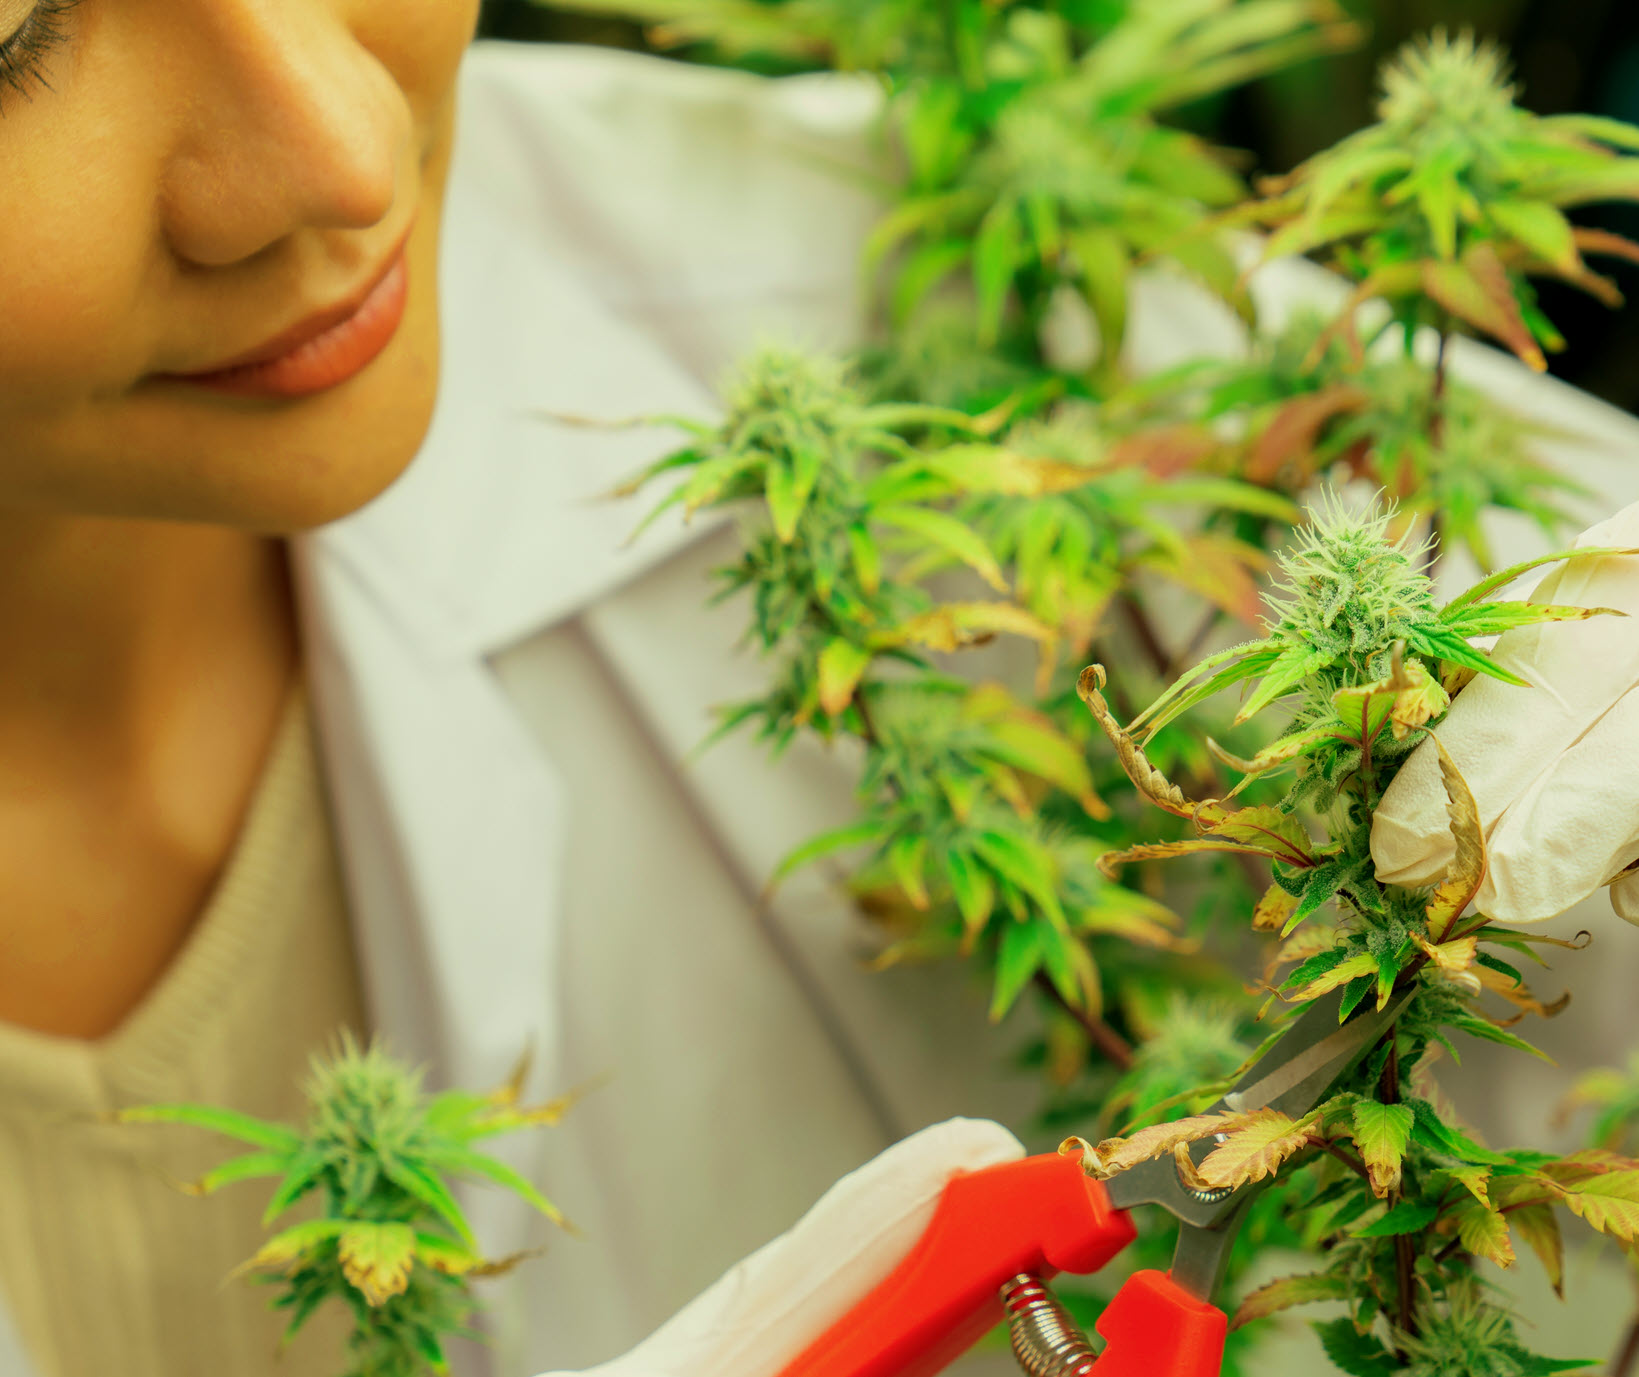 The Death of a Marijuana Worker – Asthma, OSHA, and Workplace Safety Hit the Cannabis Industry